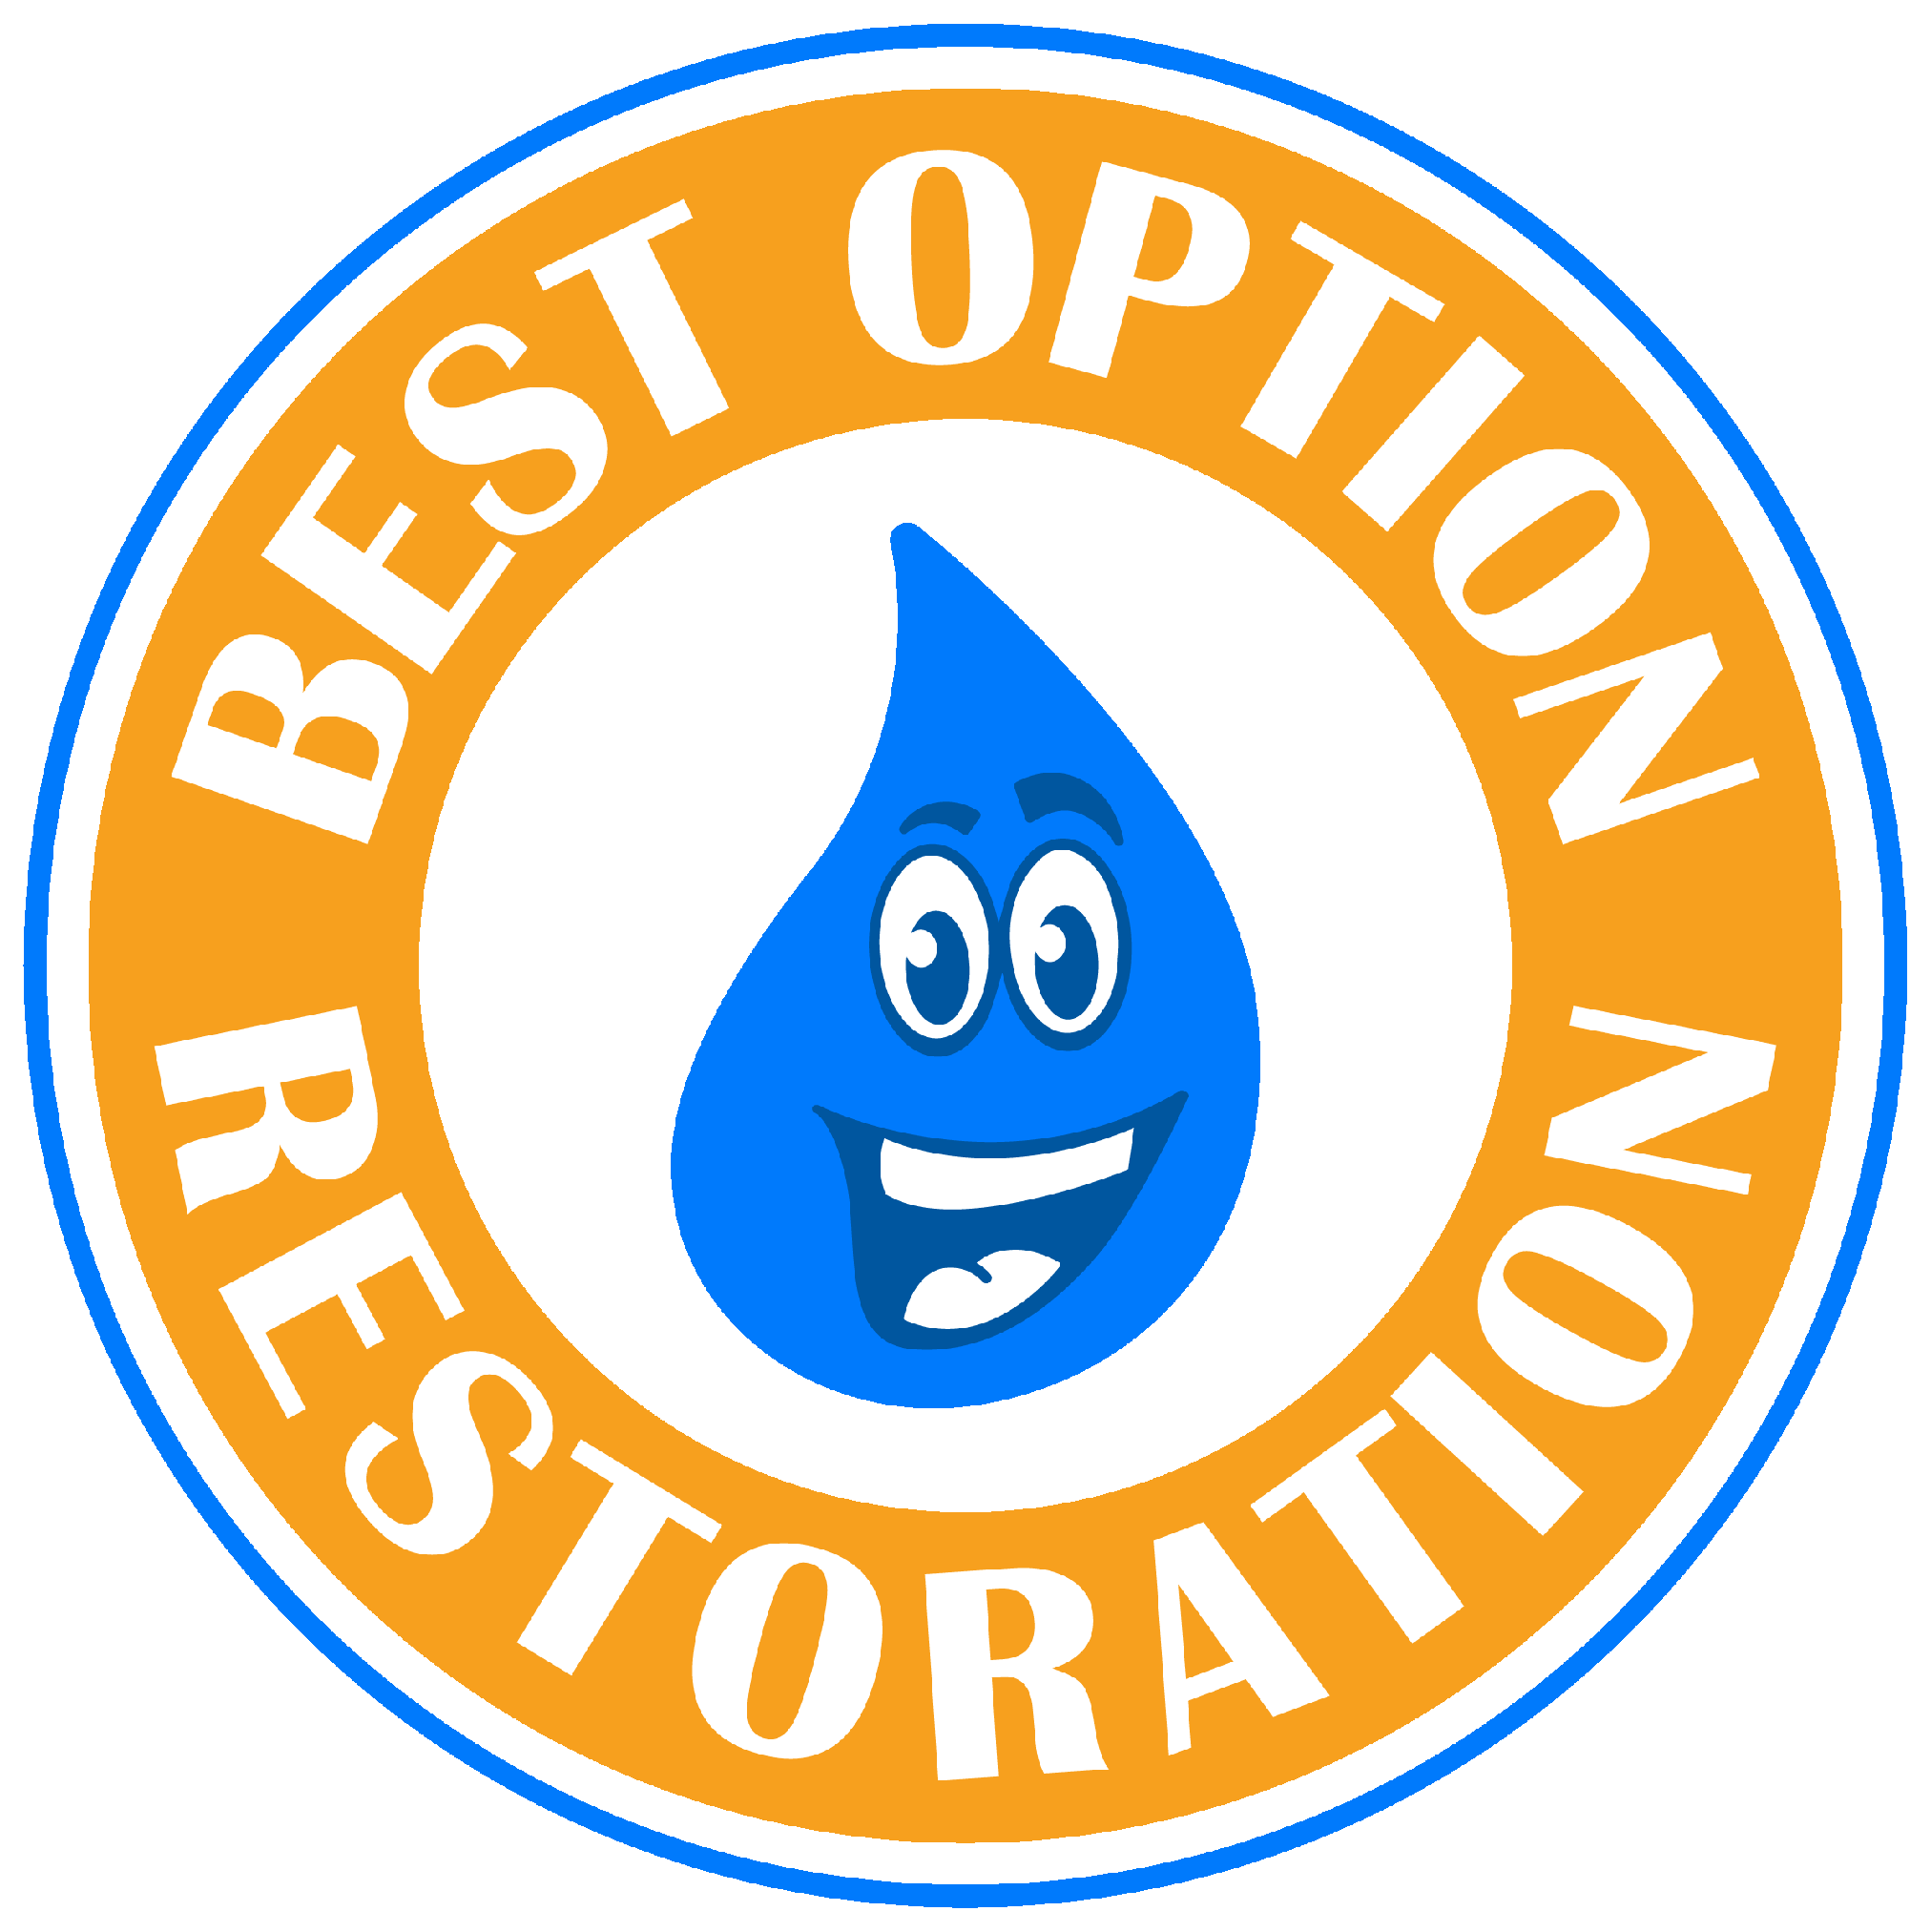 Disaster Restoration Company, Water Damage Repair Service in Frisco, TX